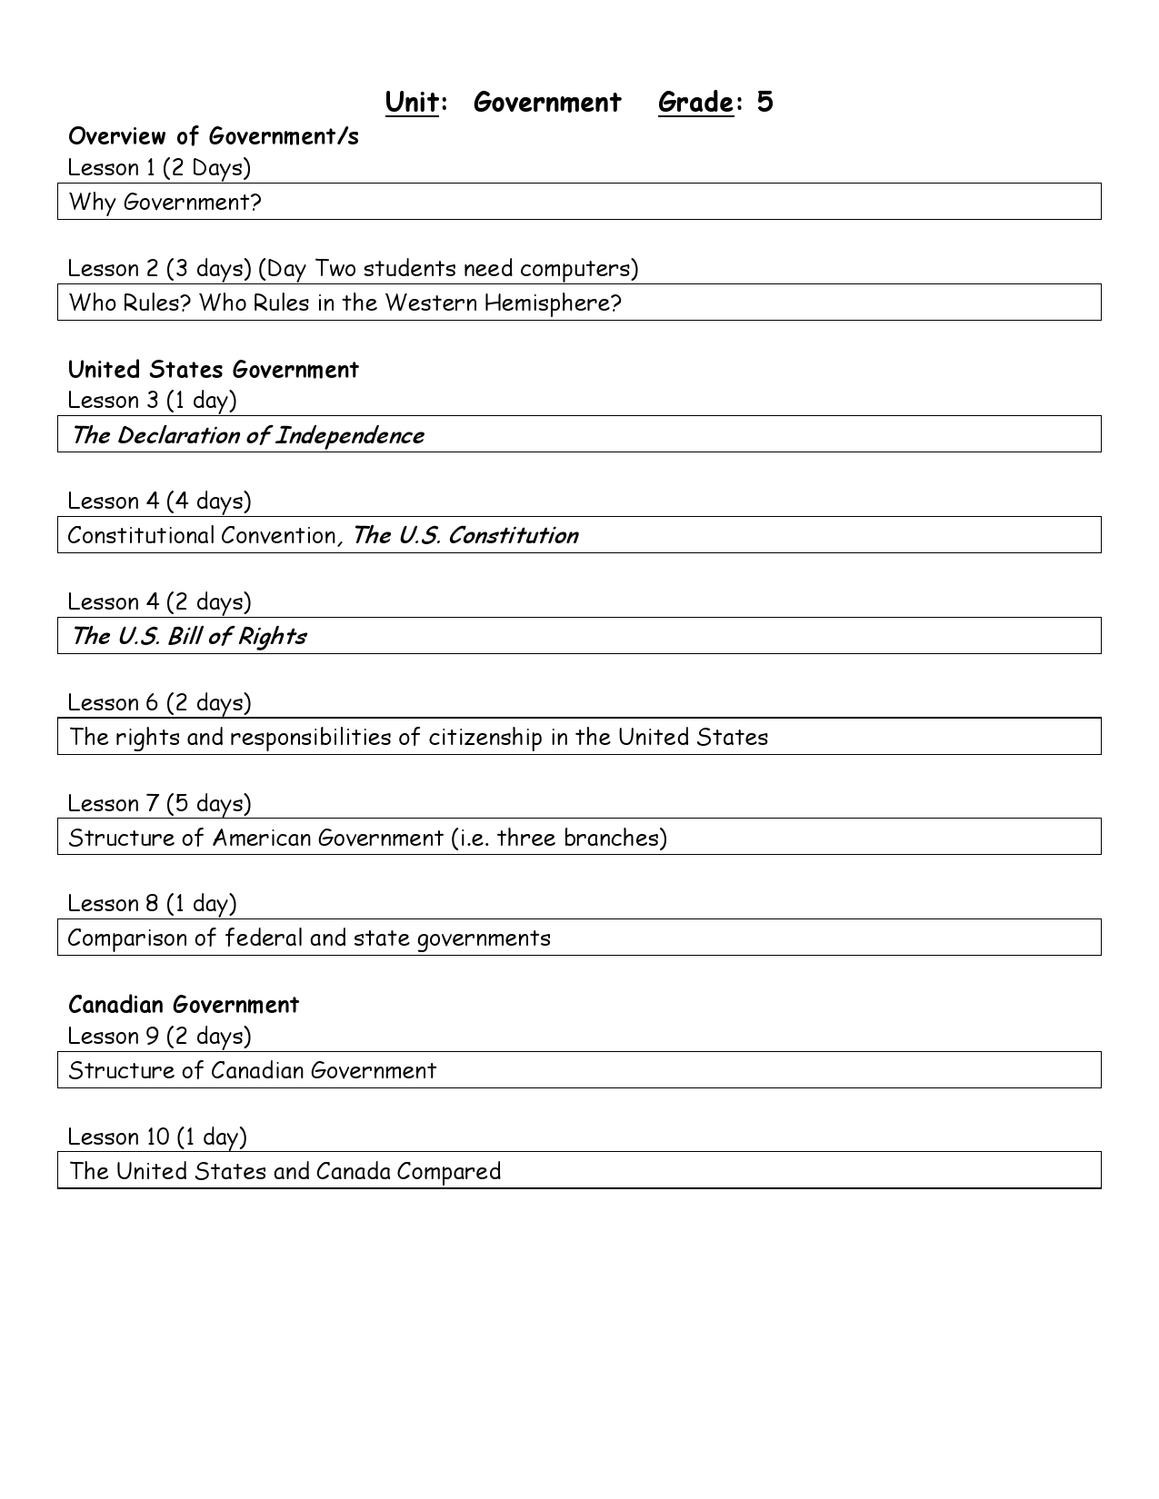 Articles Of Confederation Worksheet Answers Grade 5 Government Unit by Half Hollow Hills Schools issuu